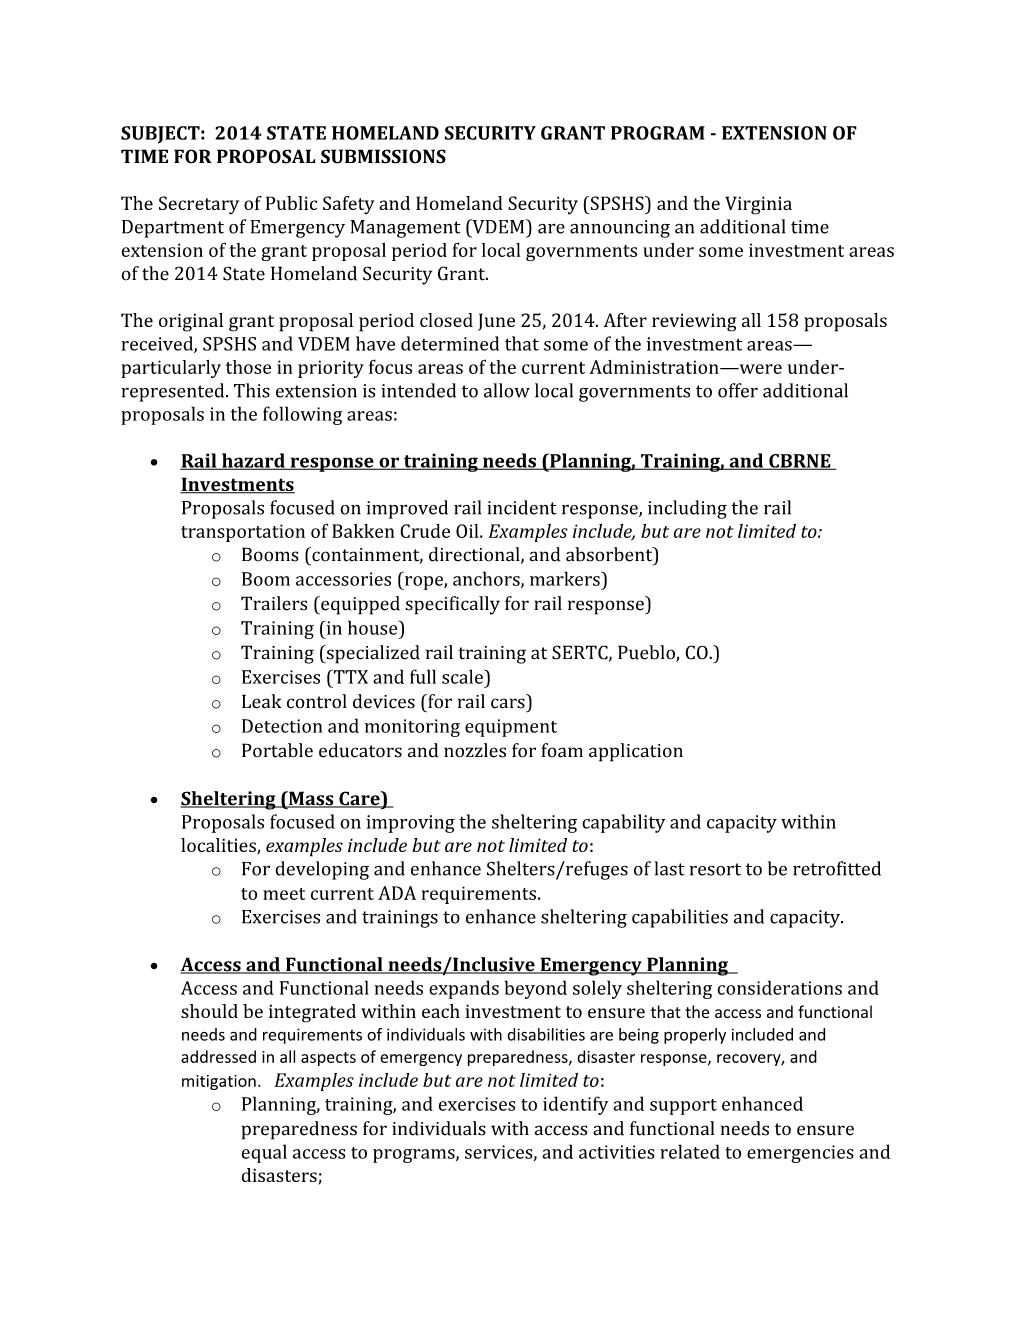 Subject: 2014 State Homeland Security Grant Program - Extension of Time for Proposal